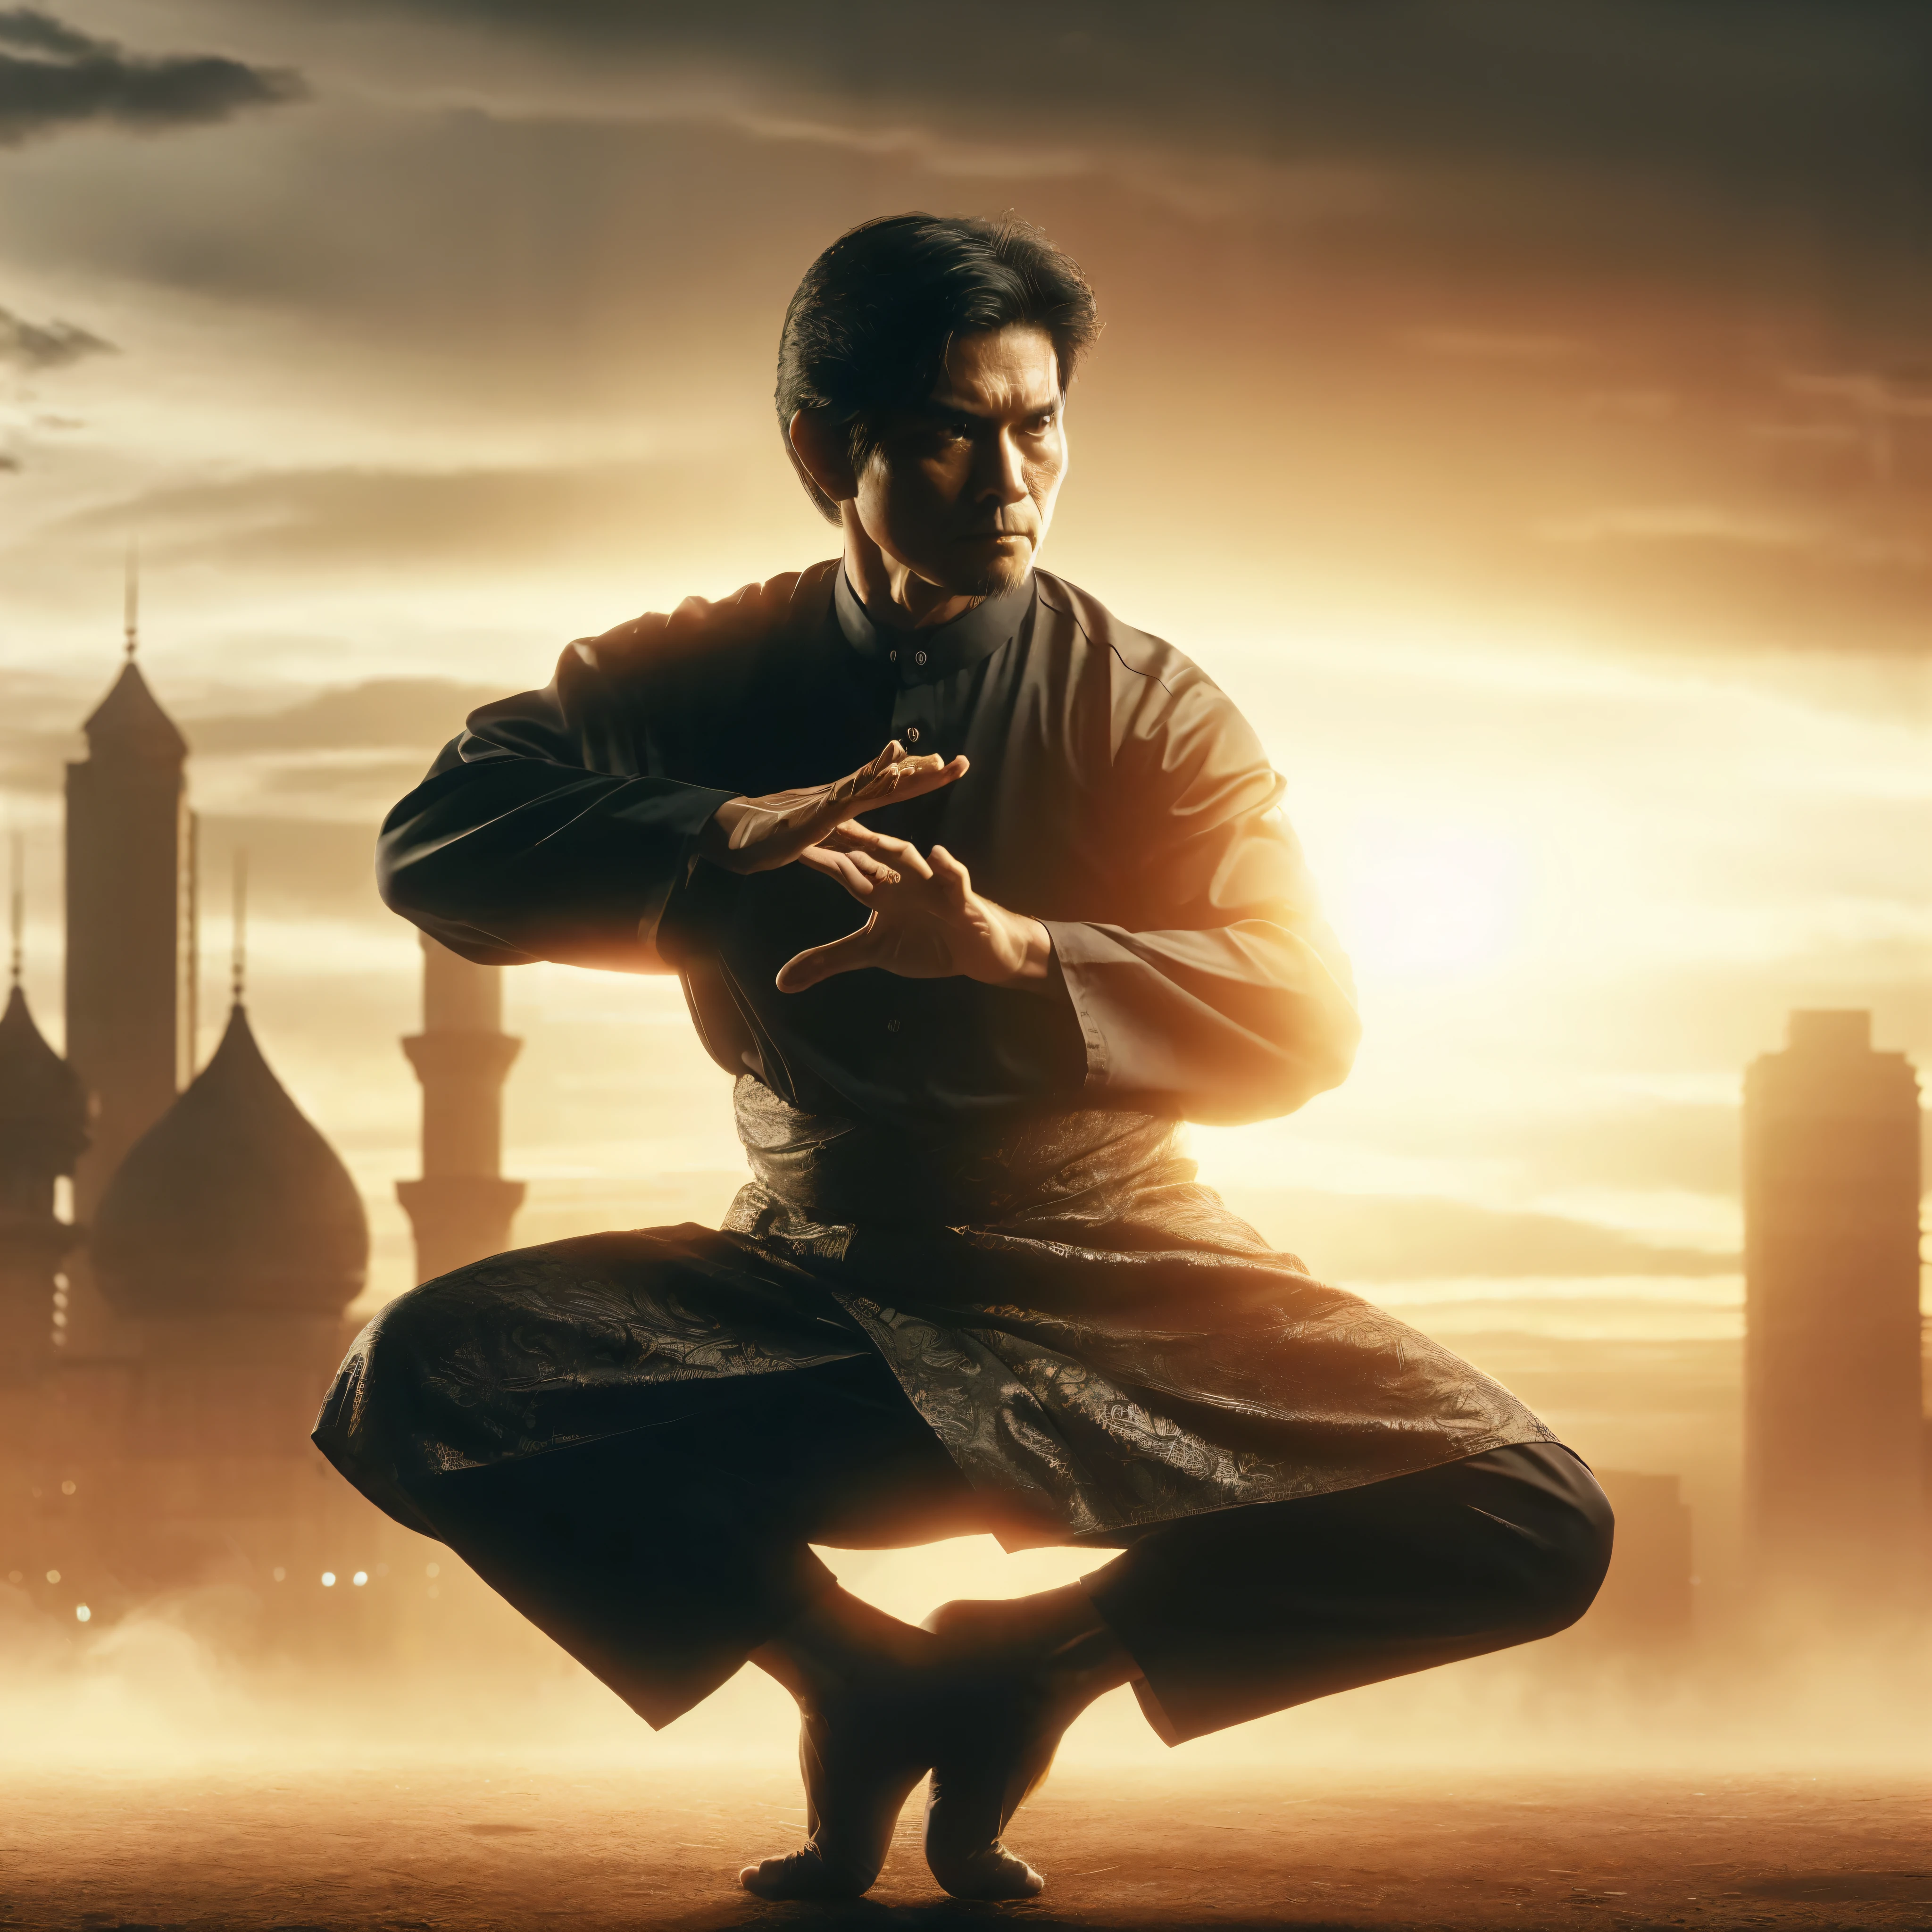 a man in a black shirt is doing a karate pose, inspired by Ma Quan, in the style of sifu 🔥 😎 🕹️ 👀 :2, inspired by Liao Chi-chun, movie promotional image, portrait shot, kung-fu, kung fu, inspired by Shen Quan, martial art pose, jackie chan, inspired by Ma Lin